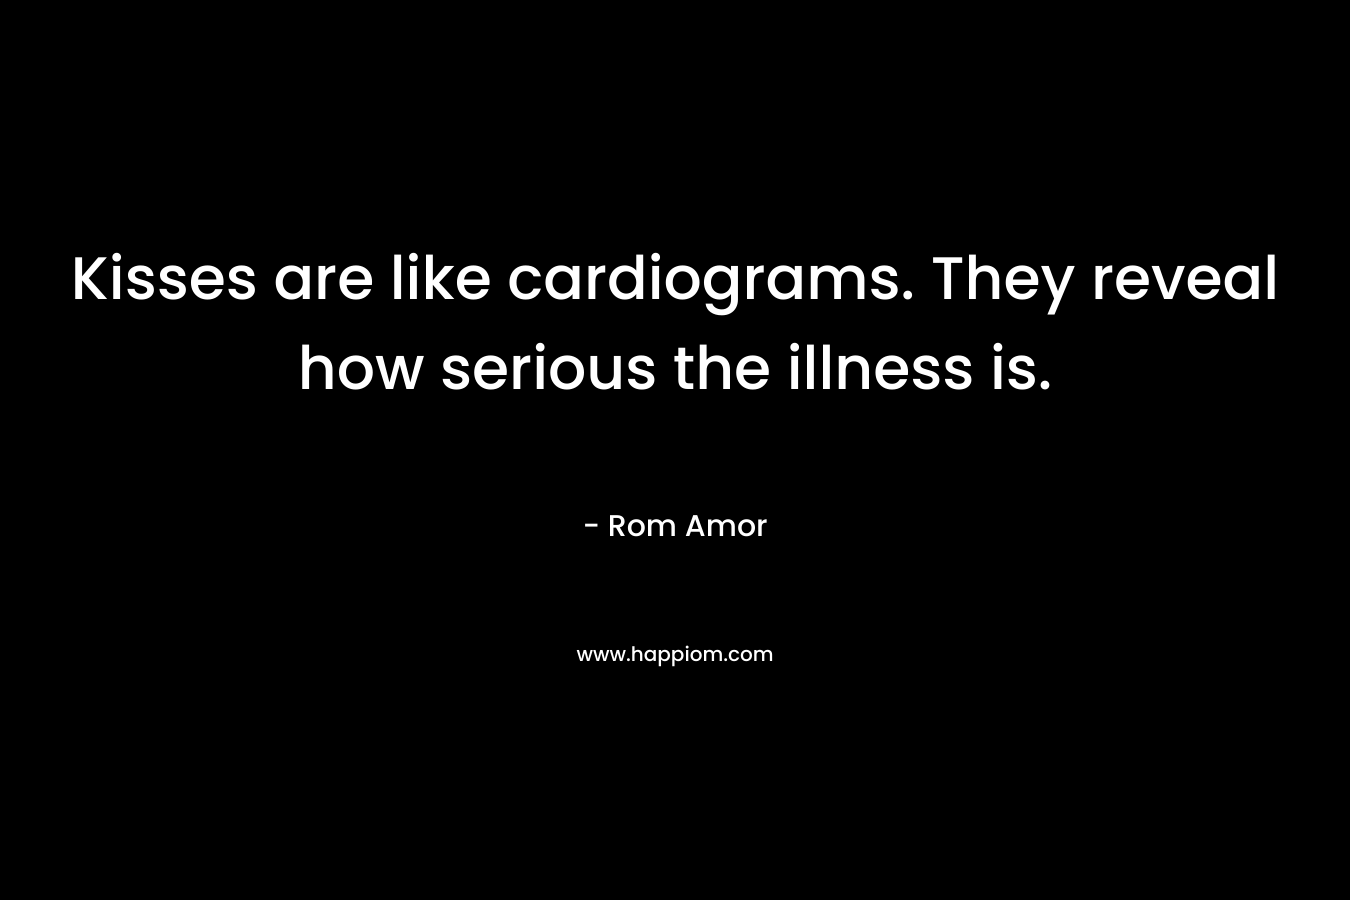 Kisses are like cardiograms. They reveal how serious the illness is. – Rom Amor